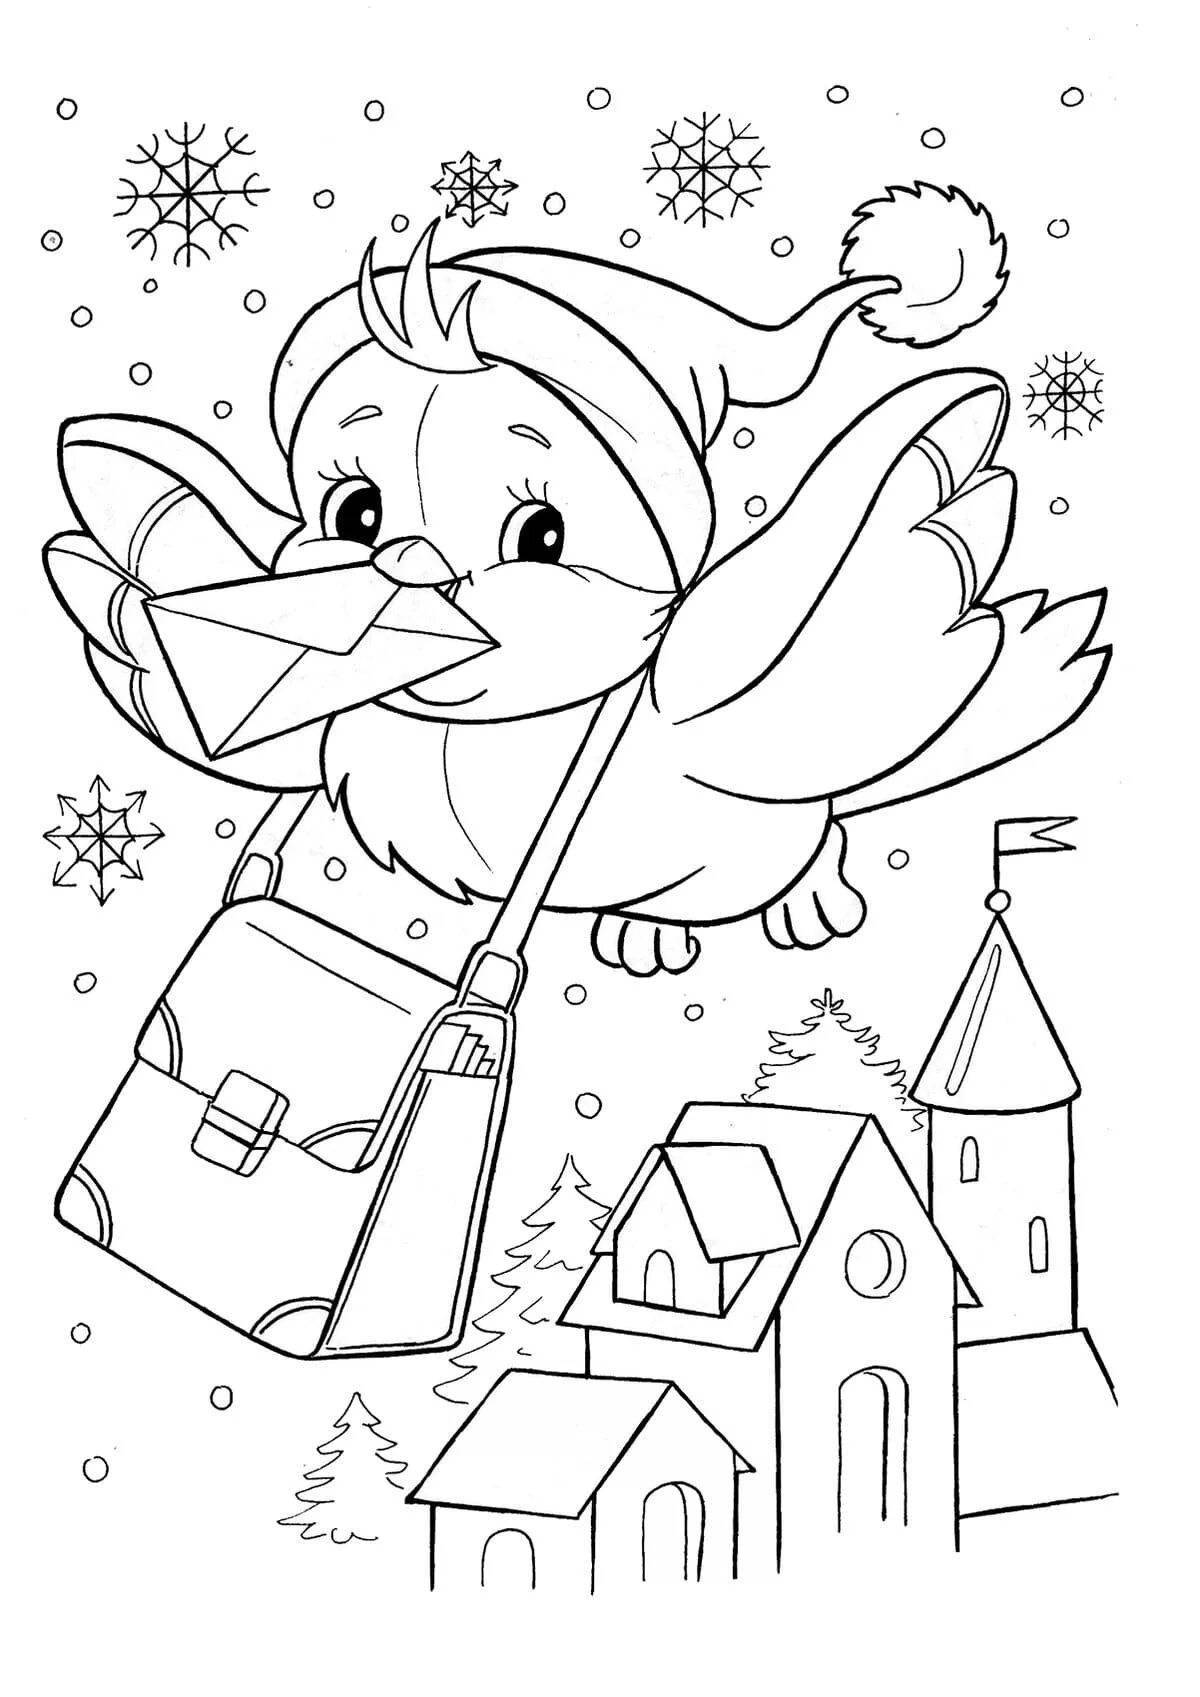 Stimulating winter coloring book for kids